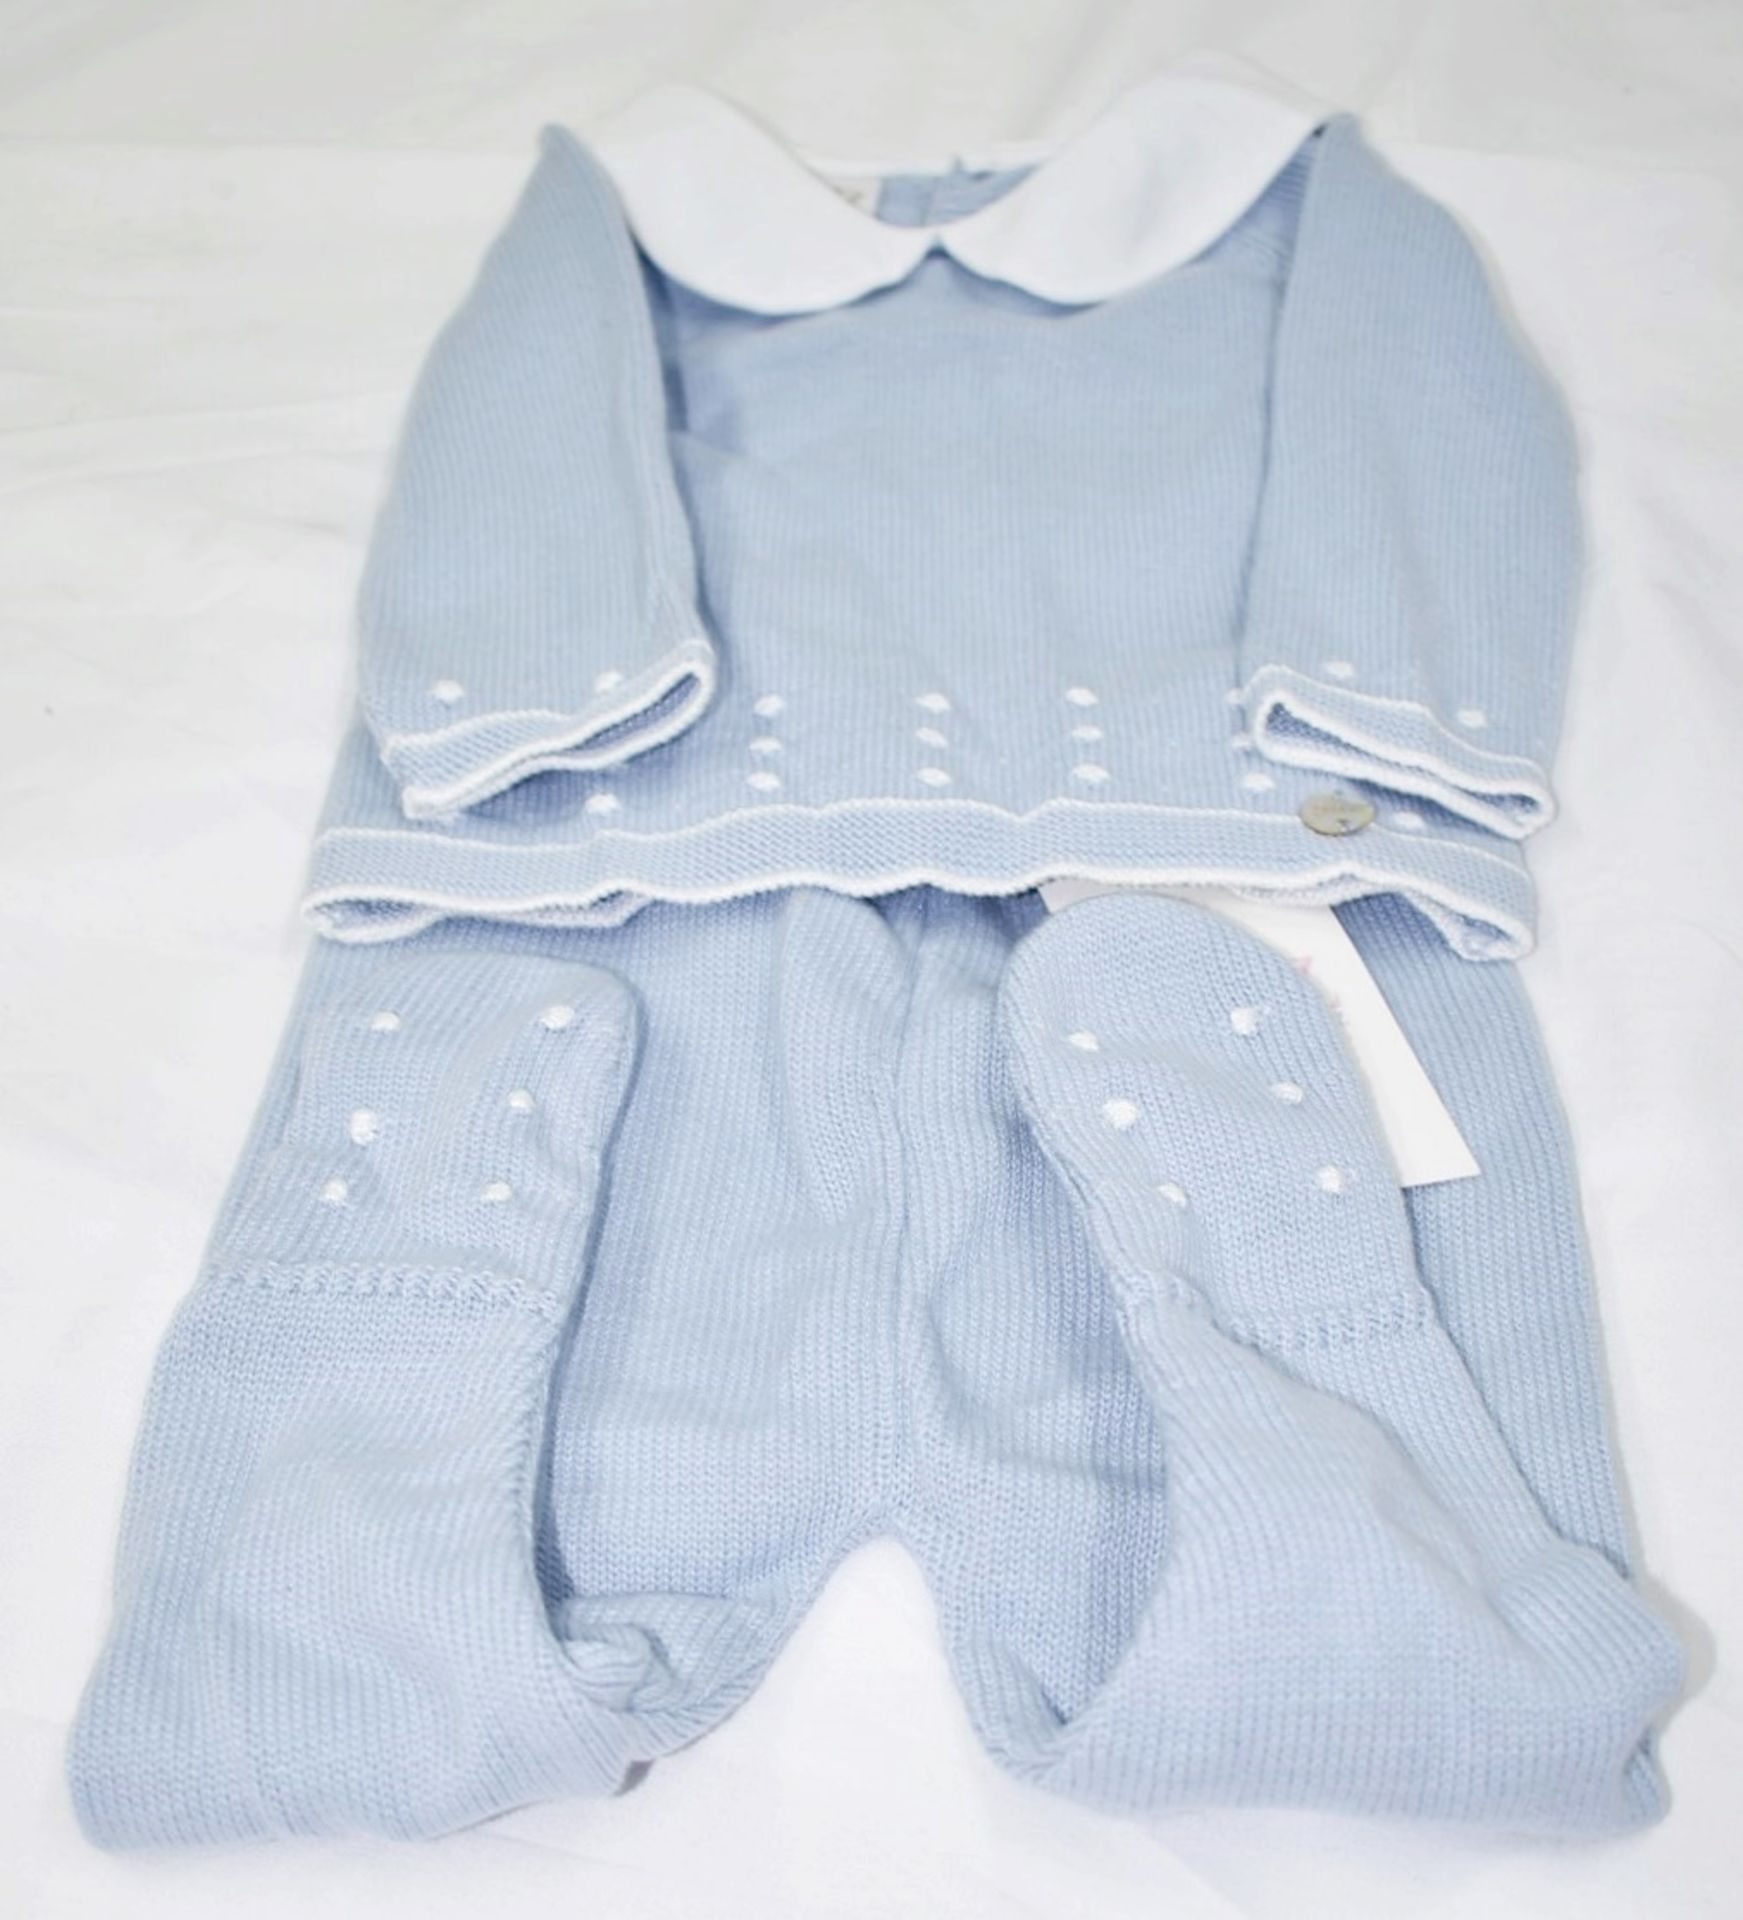 1 x PAZ RODRIGUEZ 2-Piece Knitted (Sweater, Pants) Set, in Cloud Blue, 6mth - Original Price £79.95 - Image 5 of 7